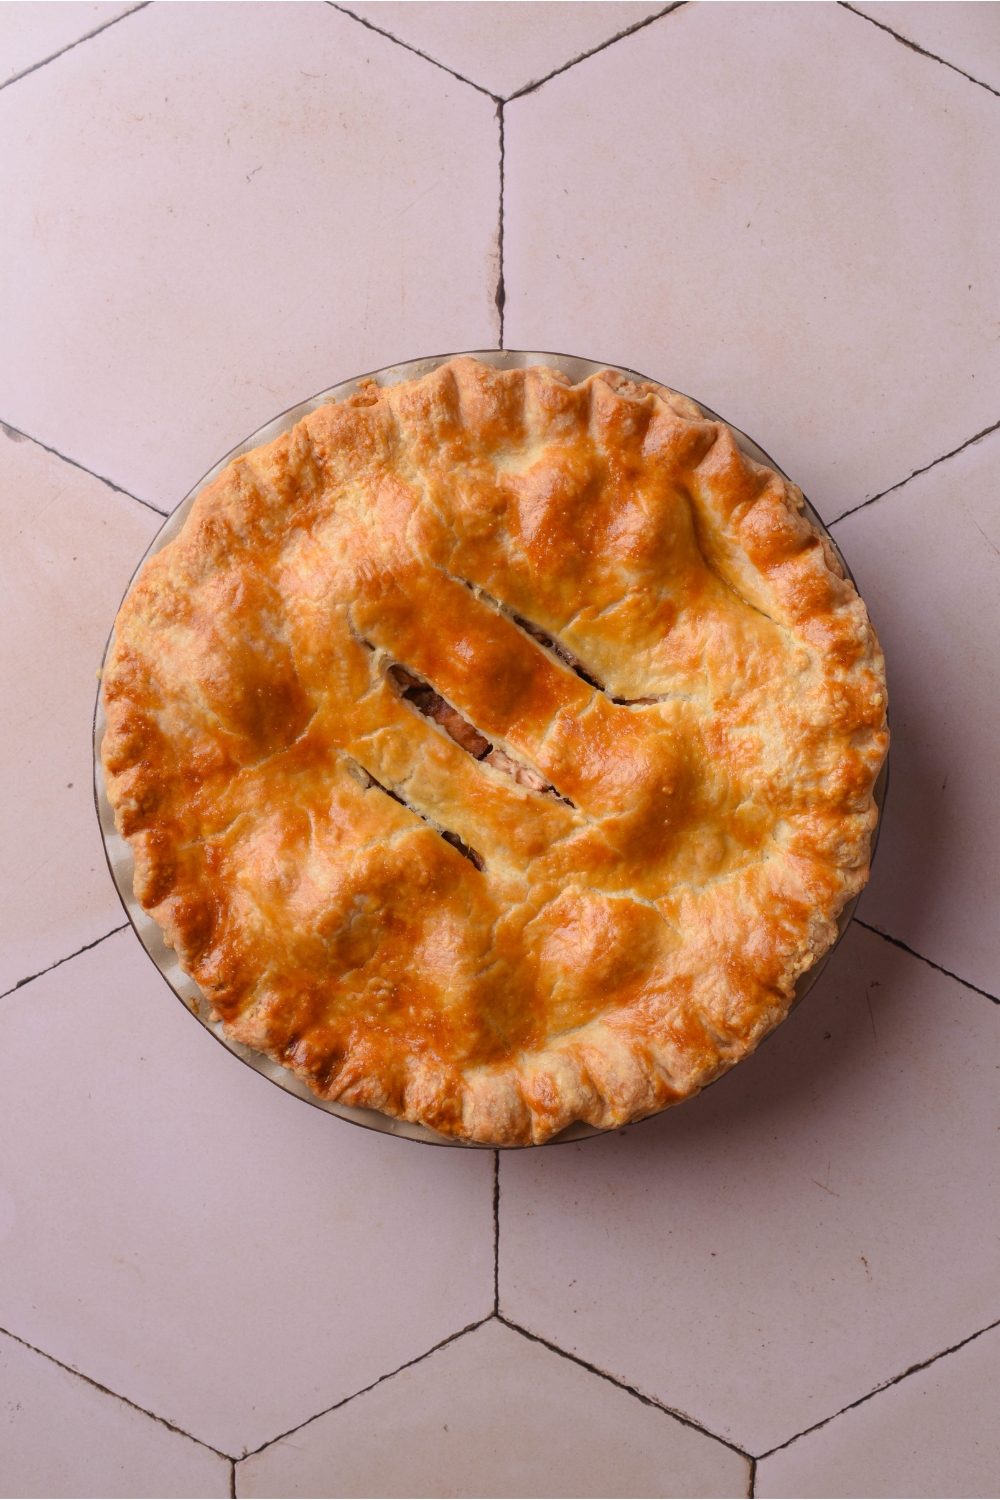 A pie pan with baked apple pie.